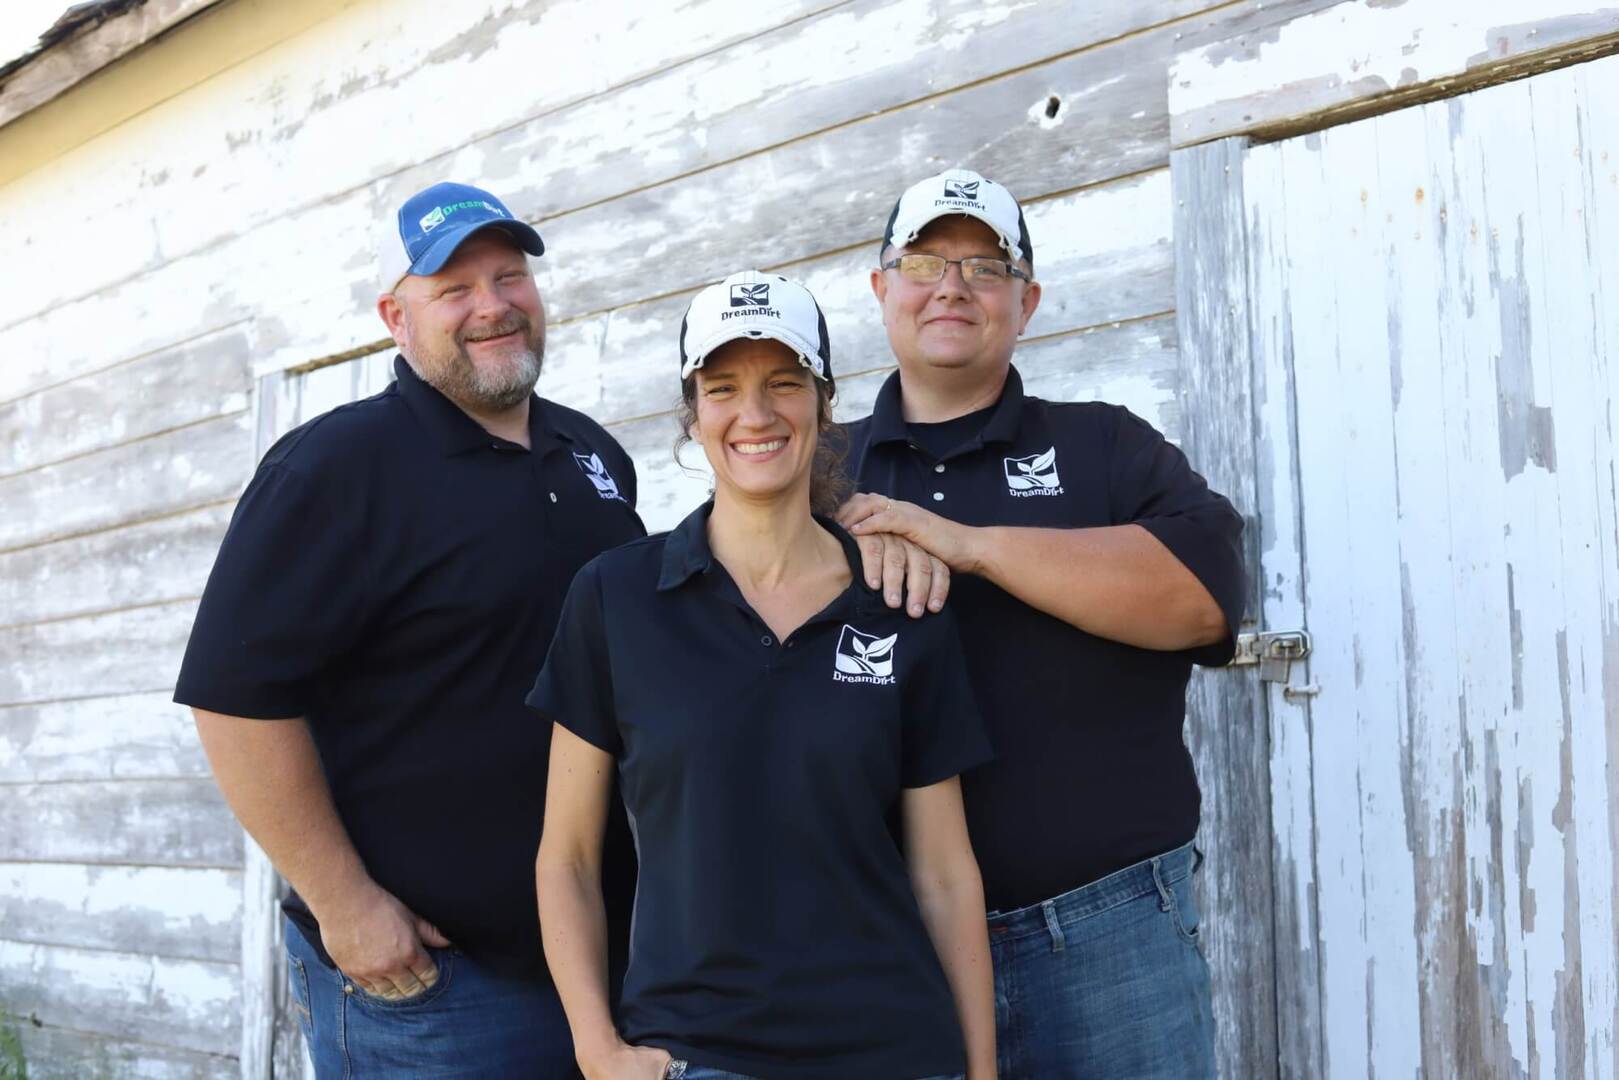 DreamDirt auctioneers and owners Jason Smith, Nicole Smith, Tom Bradley